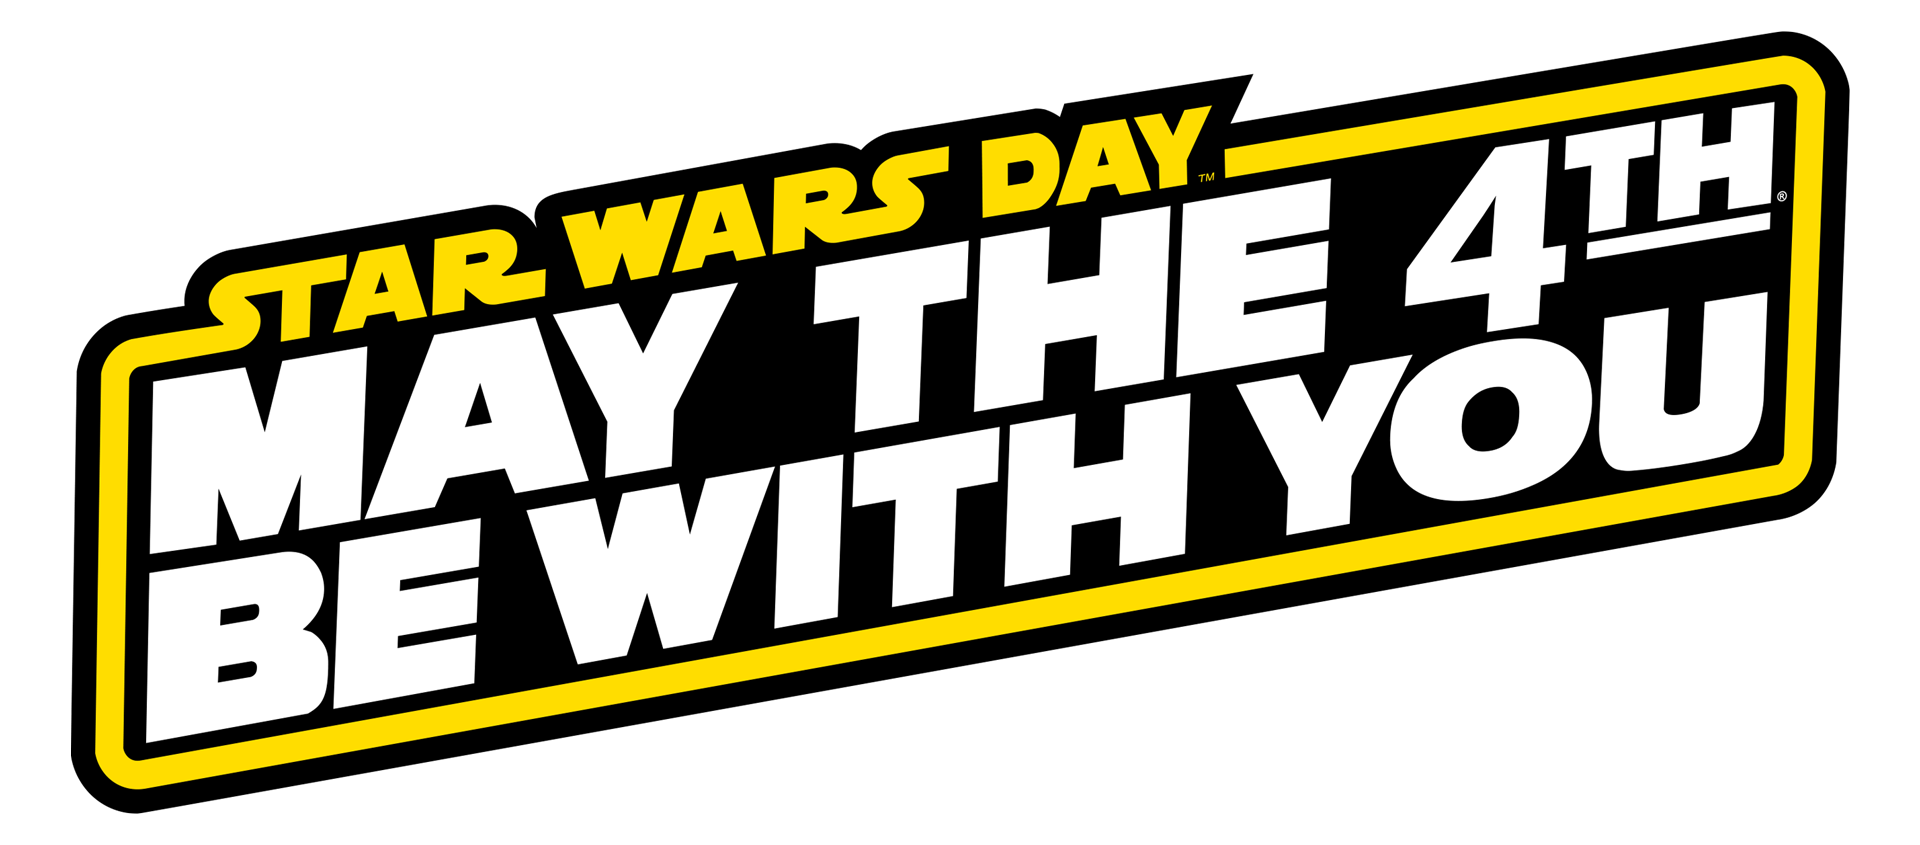 Star Wars Day: When Did “May the Fourth” Begin?